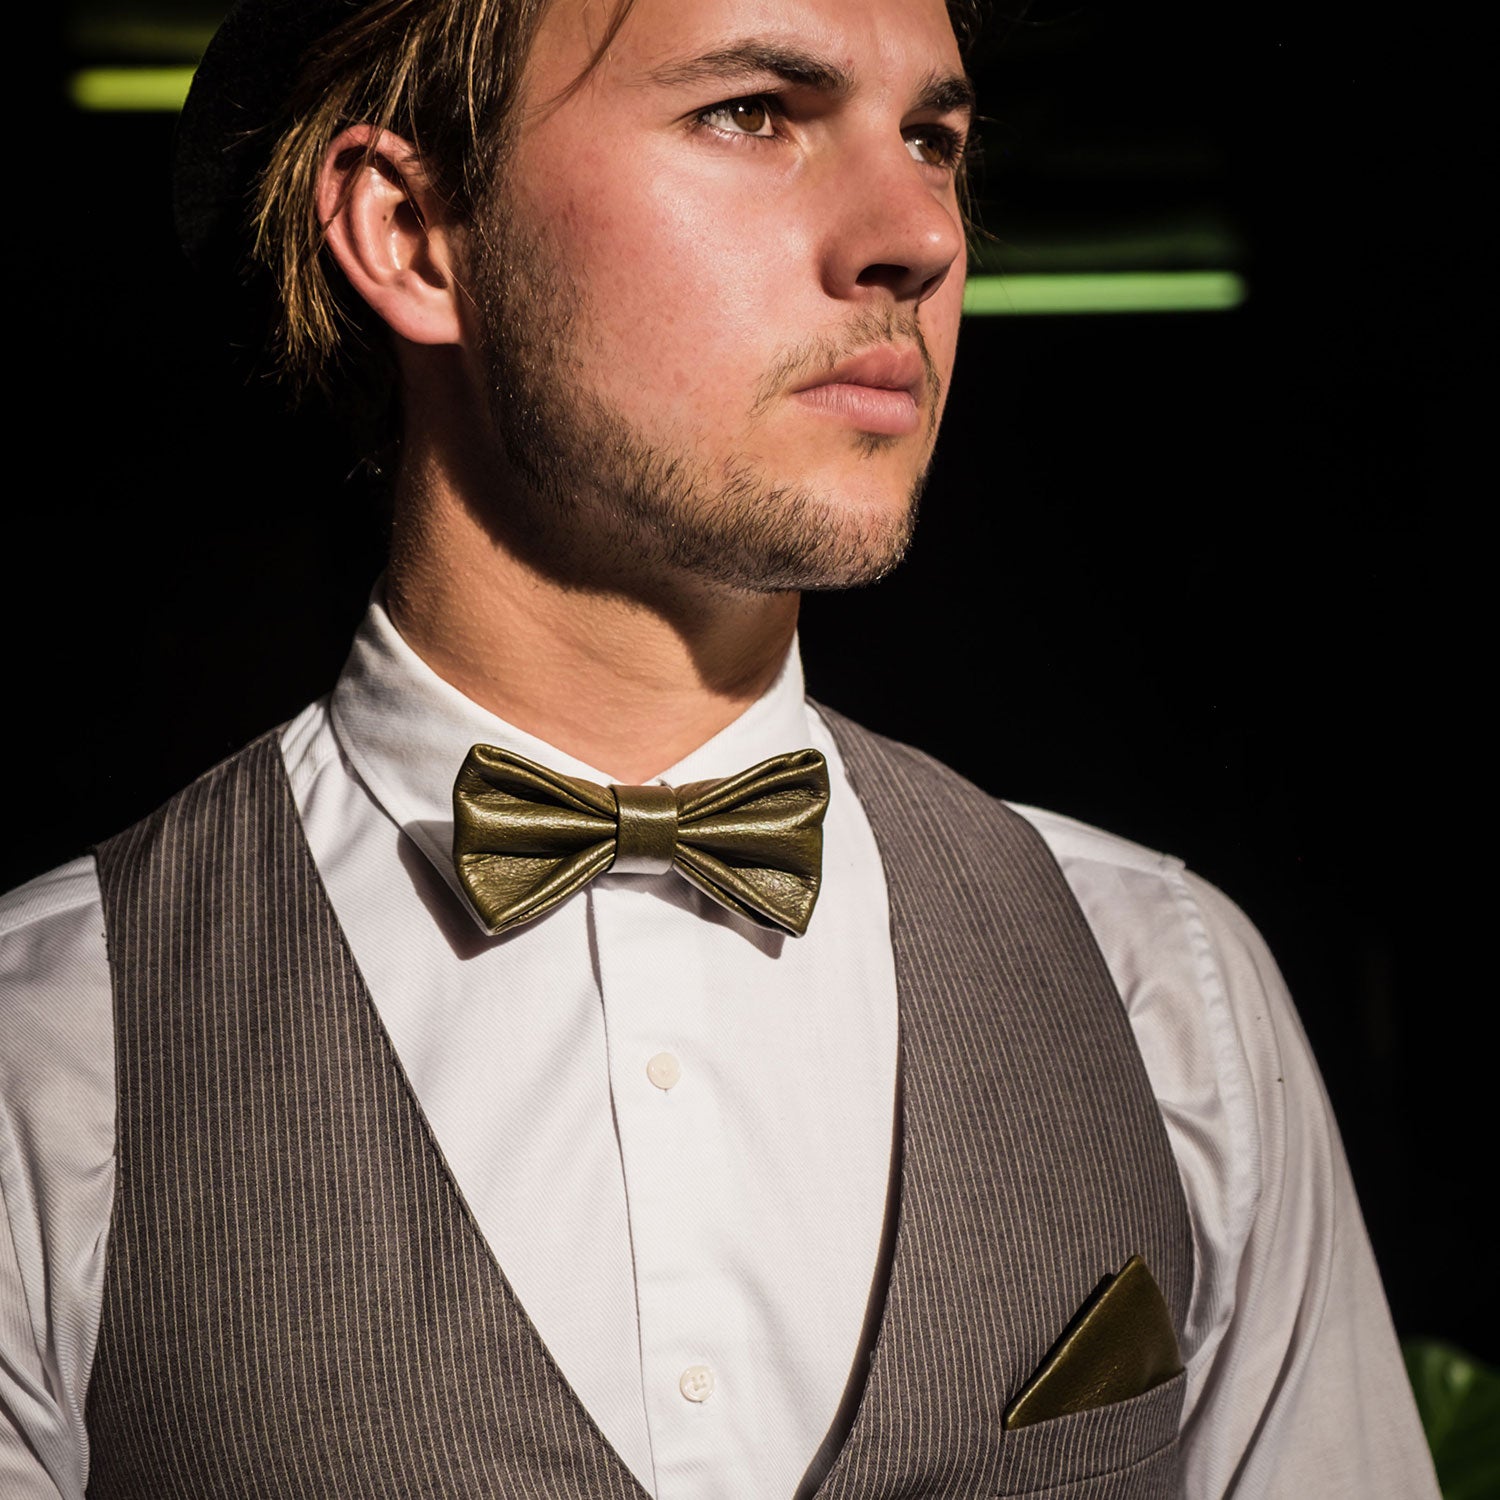 Bow Tie No.1 – Oliver Green